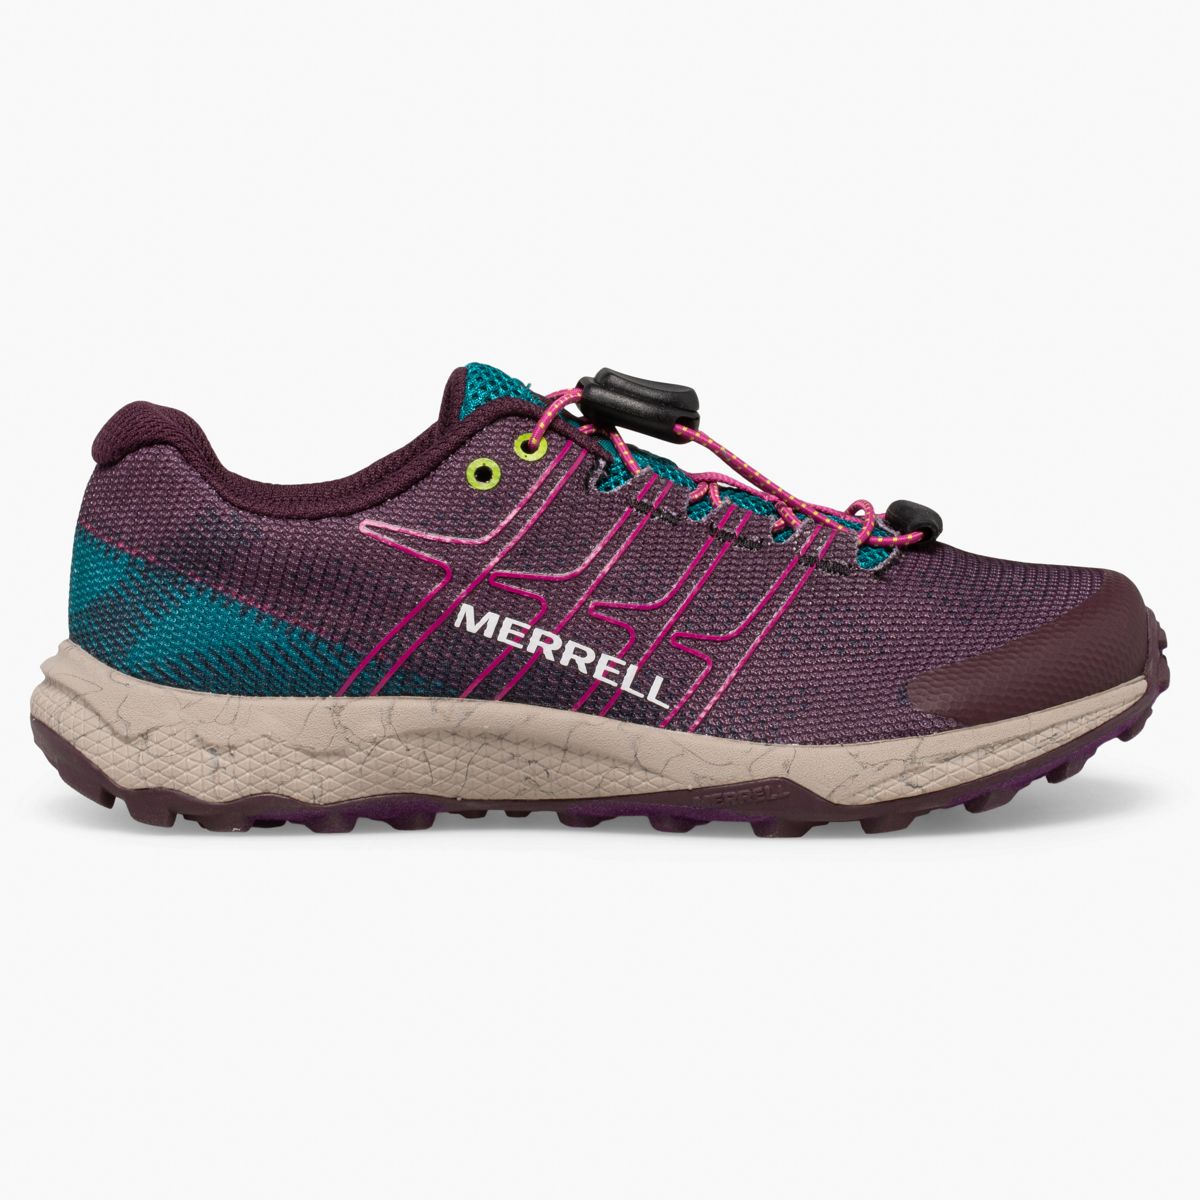 Collections - Moab Flight Collection | Merrell